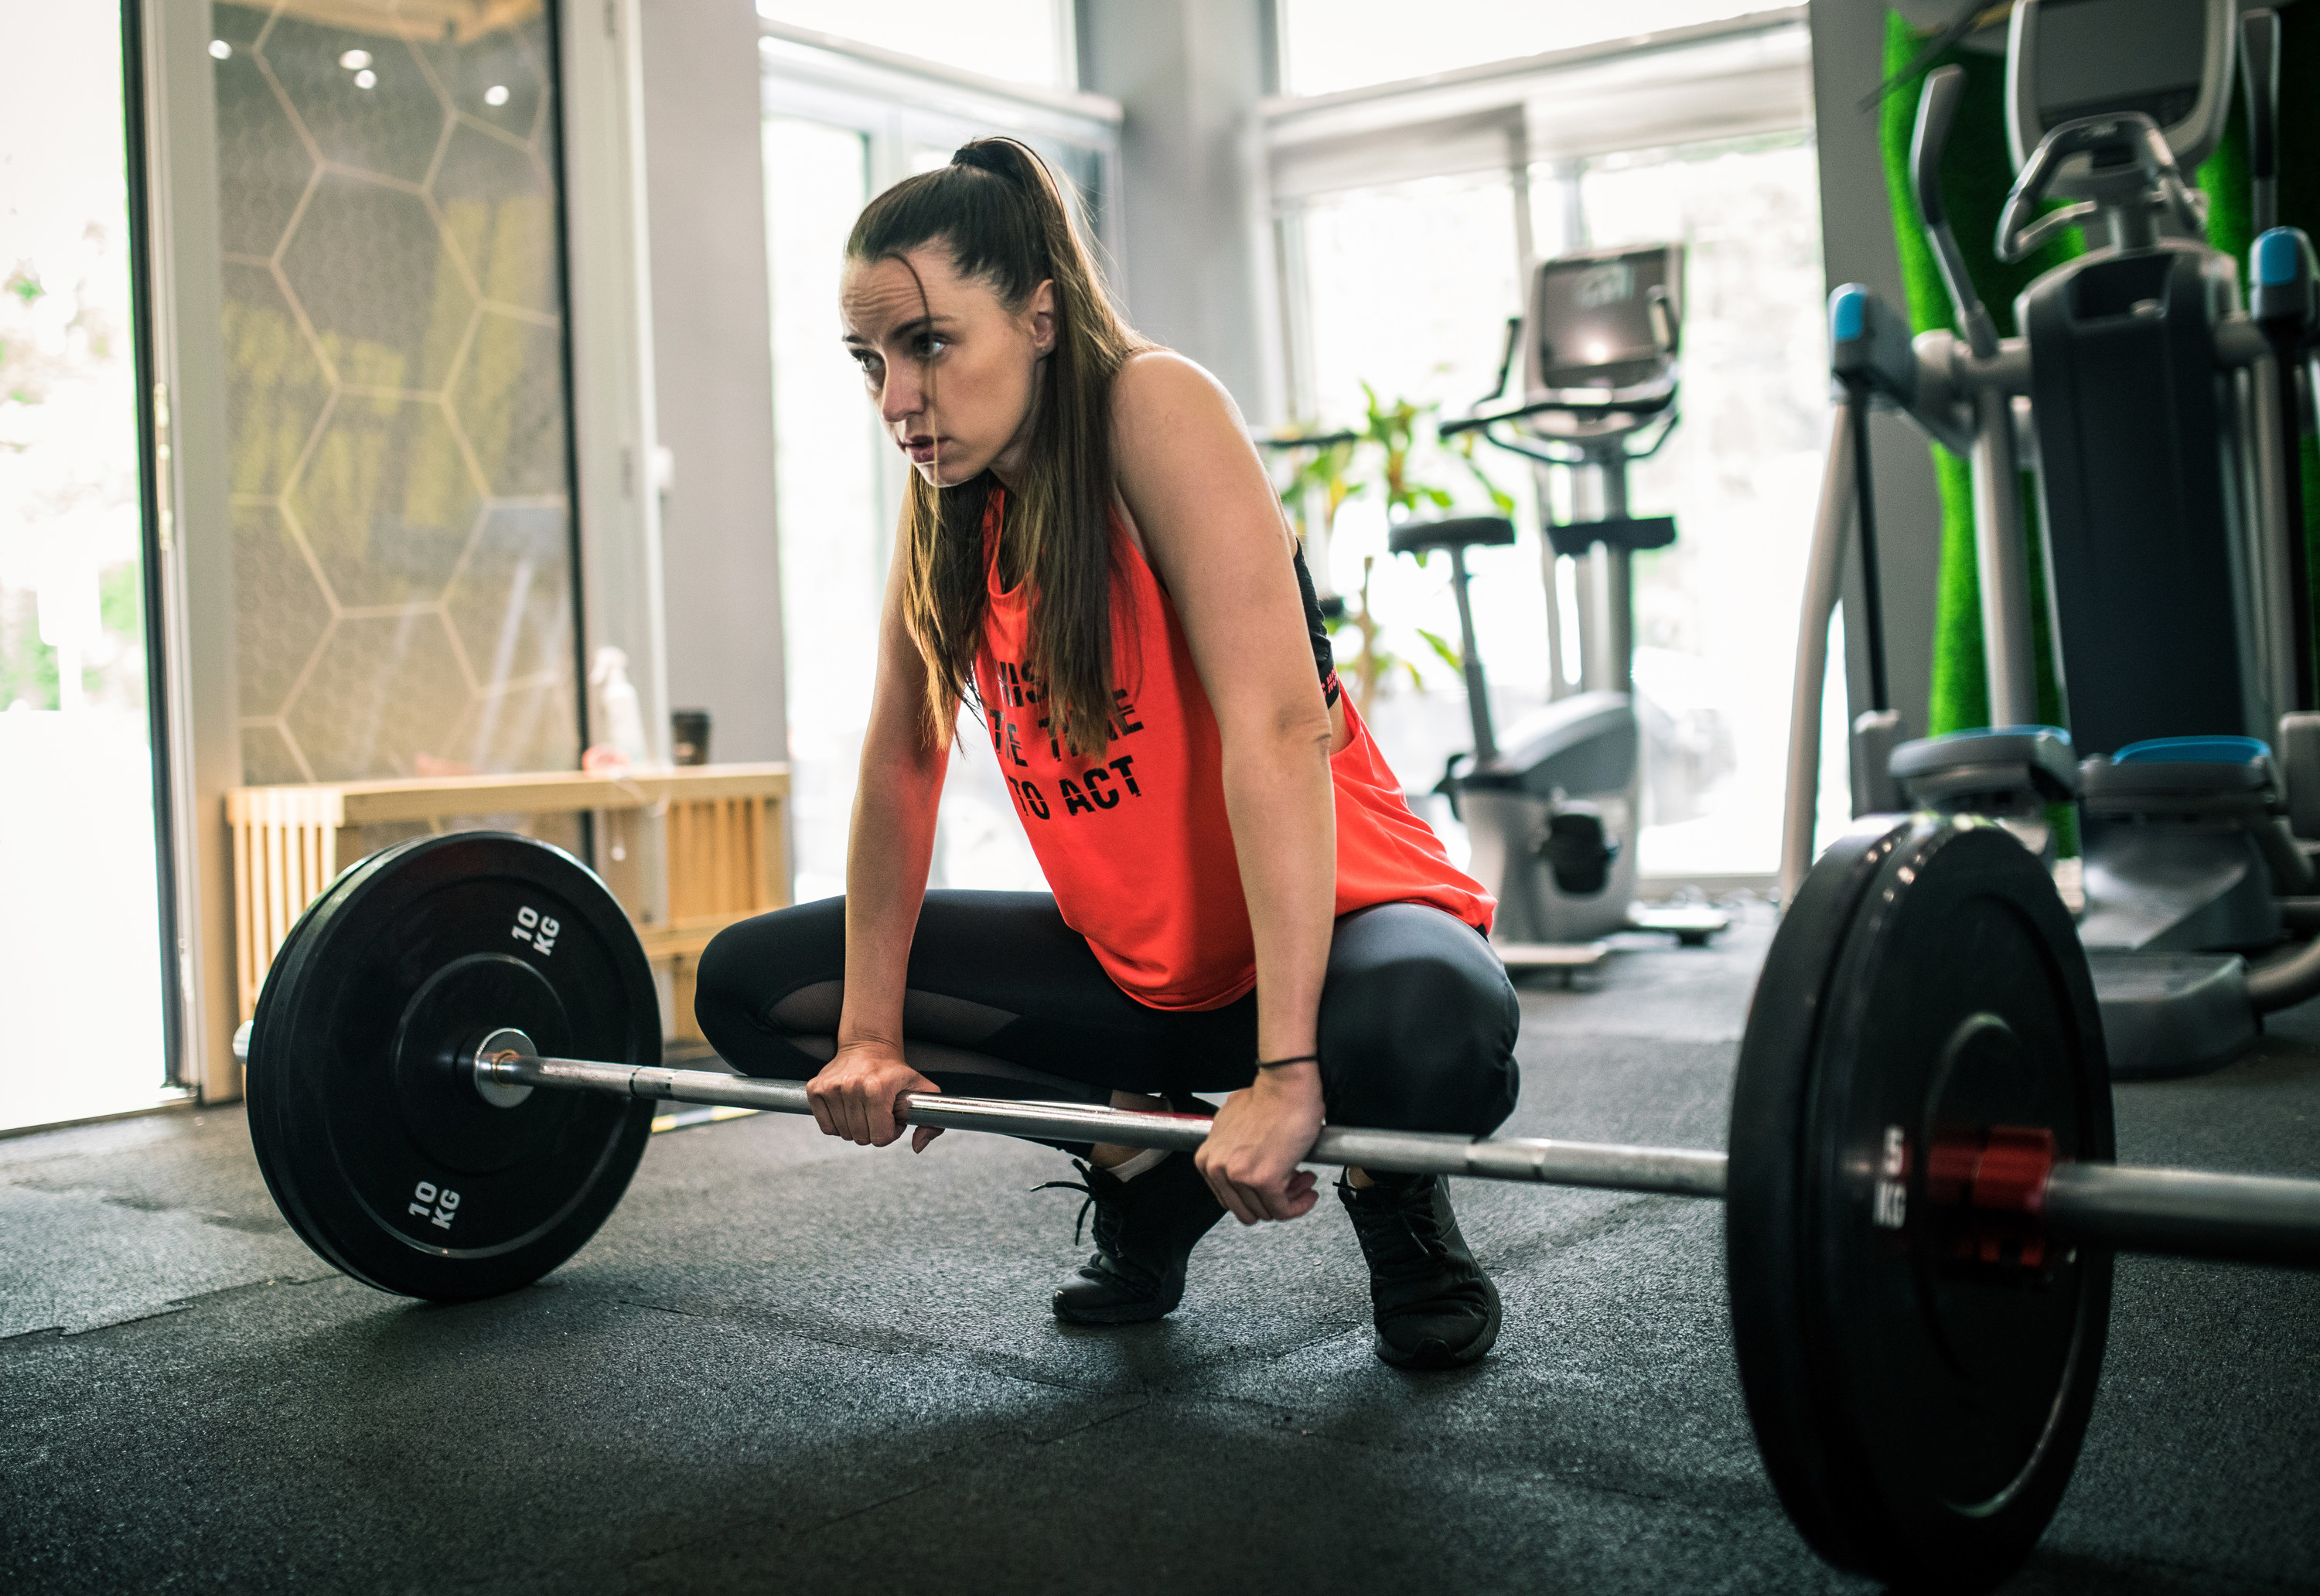 12 things you need to know before you start dating a fitness girl - GymBeam  Blog